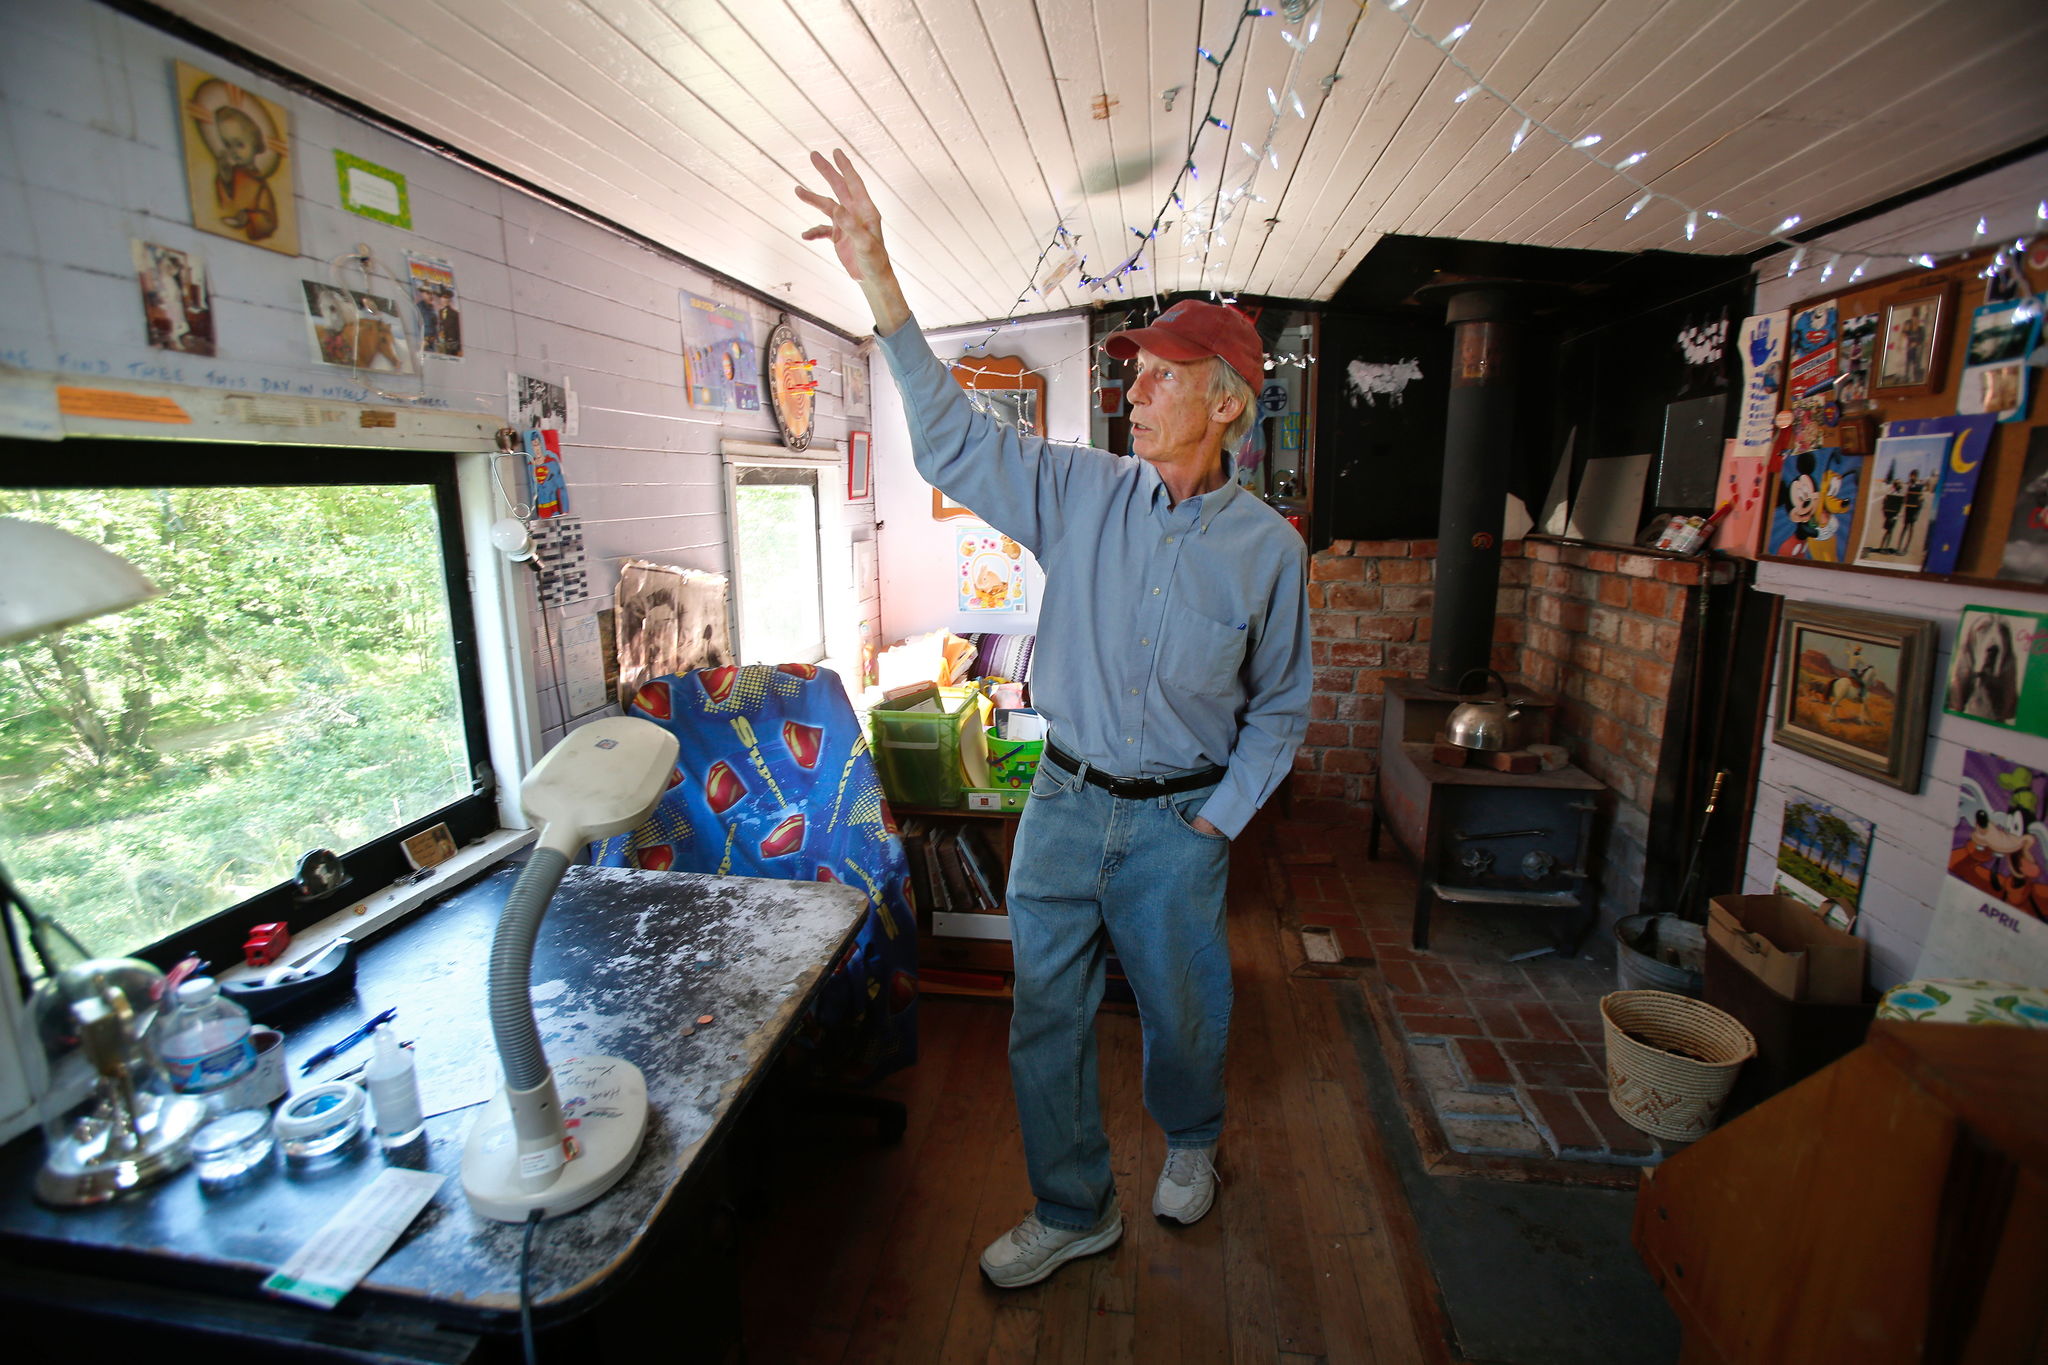 Jim Freeman stands inside the 1928 Milwaukee Road railroad car, moved to the island by ferry from Kirkland in 1979. He’s got 625 square feet of living space.